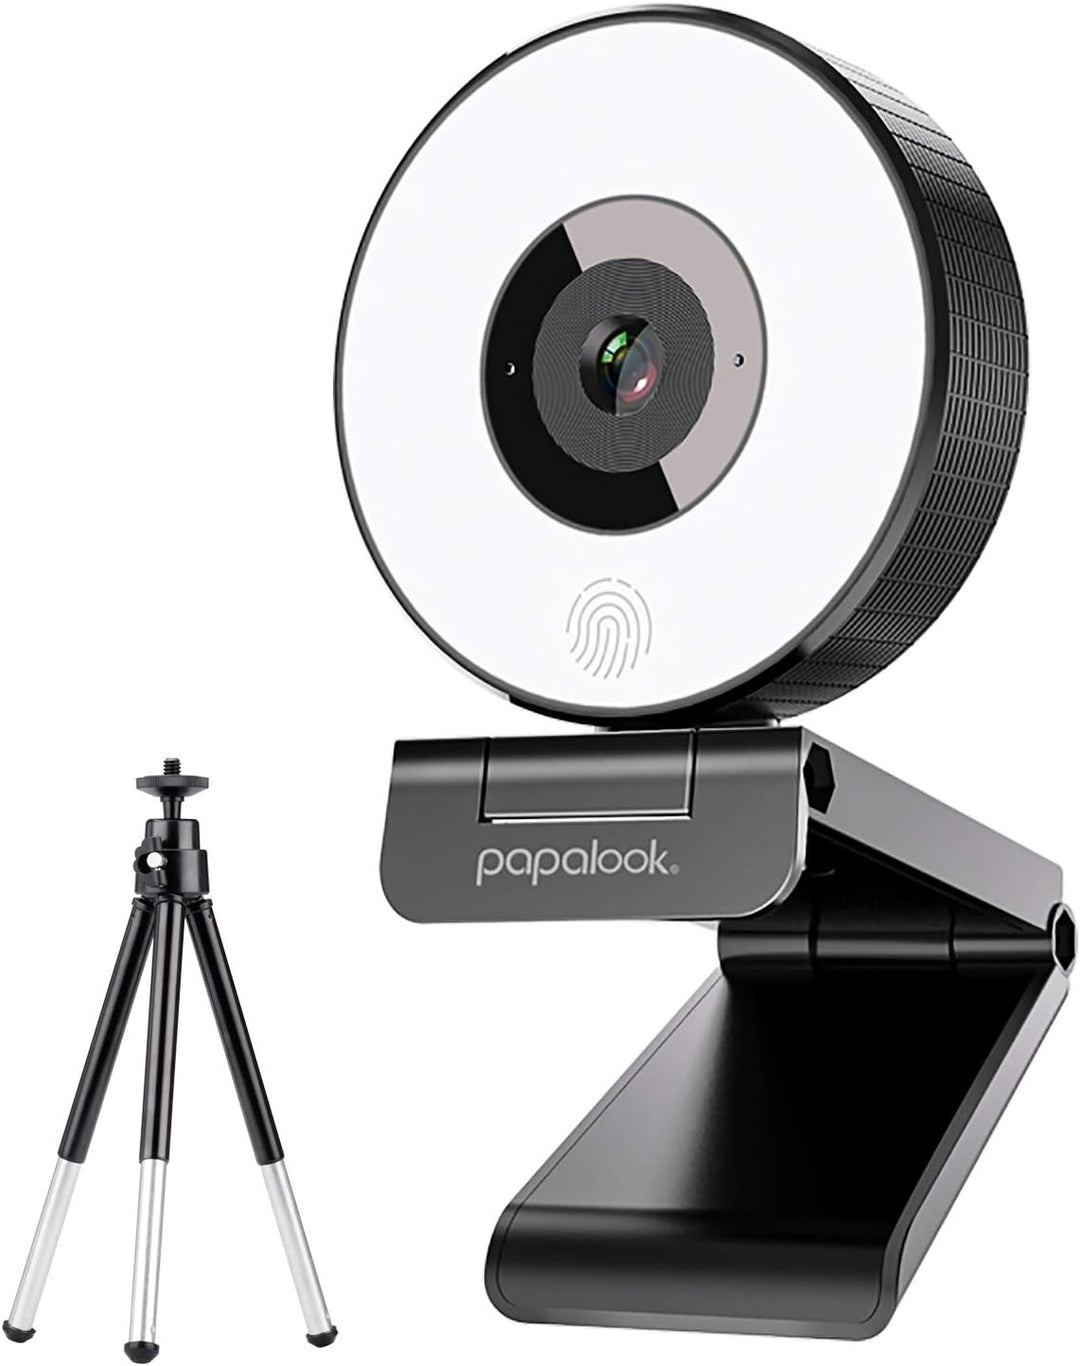 PAPALOOK PA552 Live Streaming Webcam with Ring Light